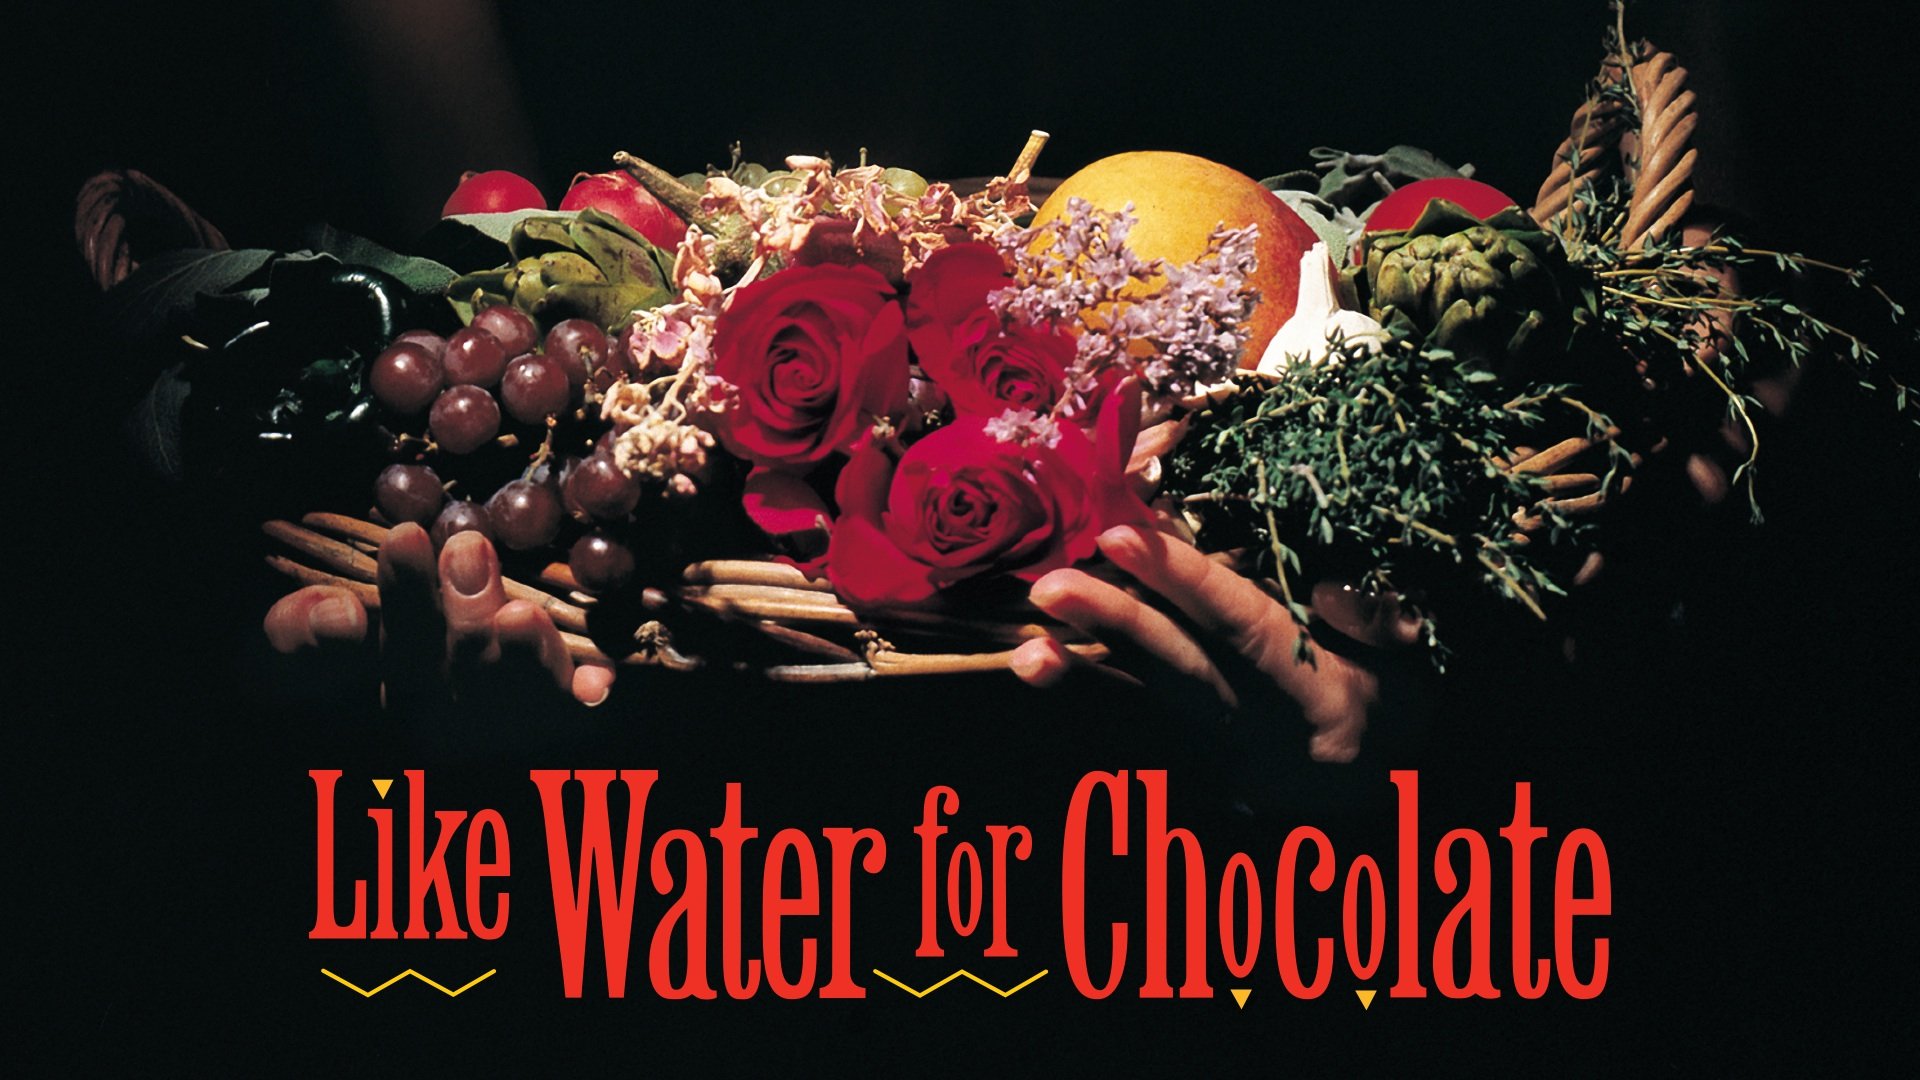 magical realism in like water for chocolate